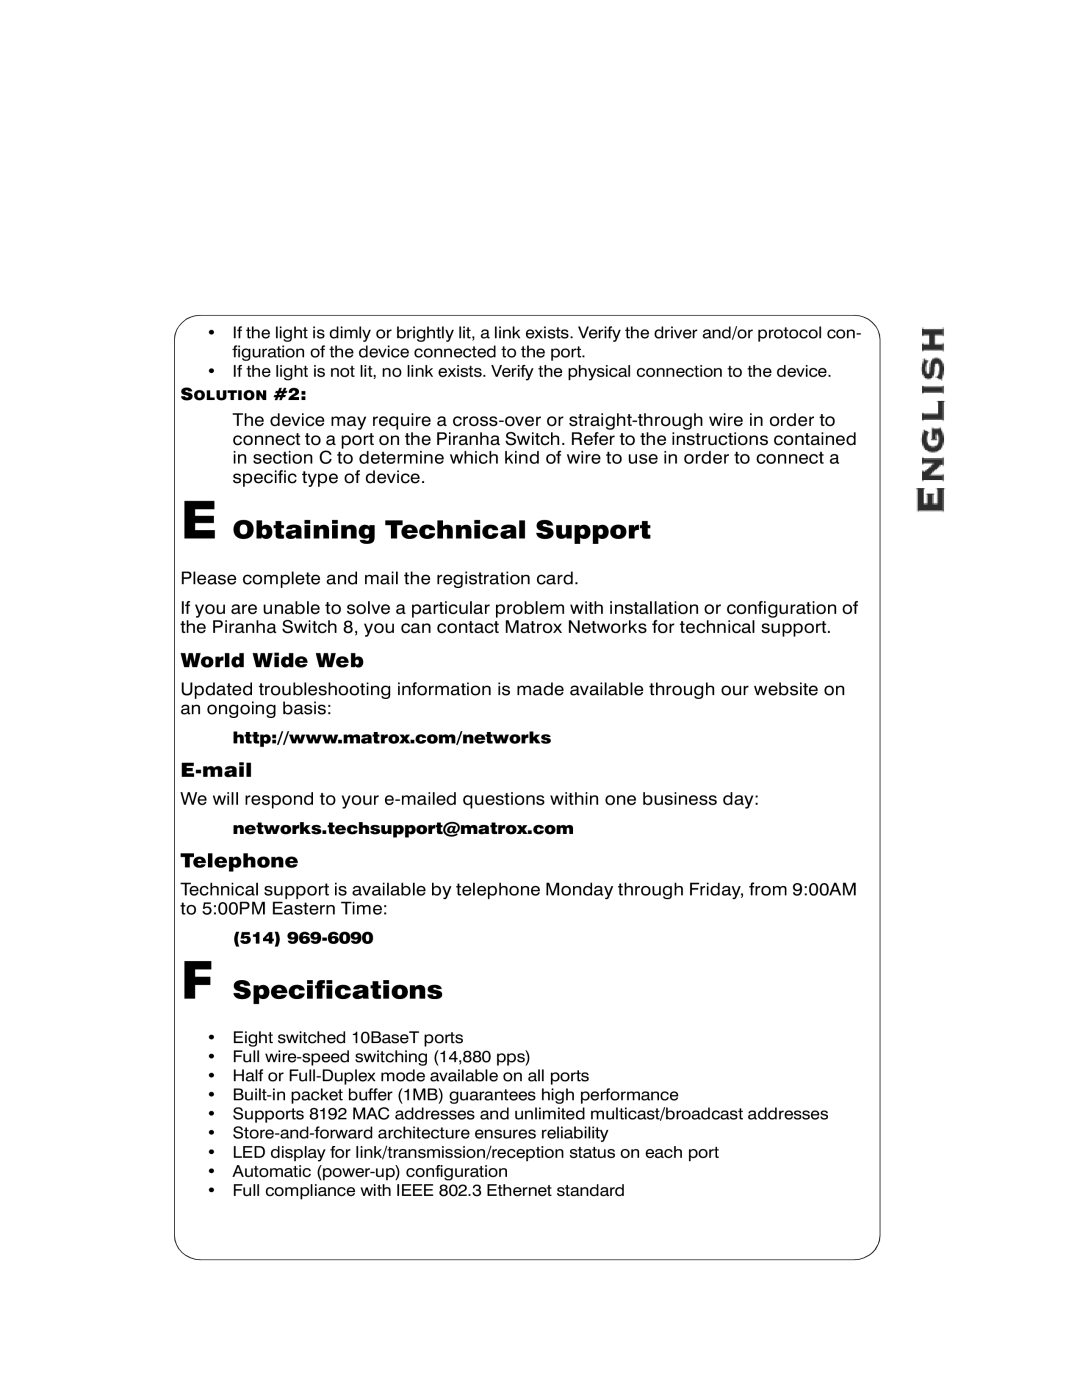 Hawking Technology SAE8 manual E Obtaining Technical Support, F Specifications, World Wide Web, E-mail, Telephone 